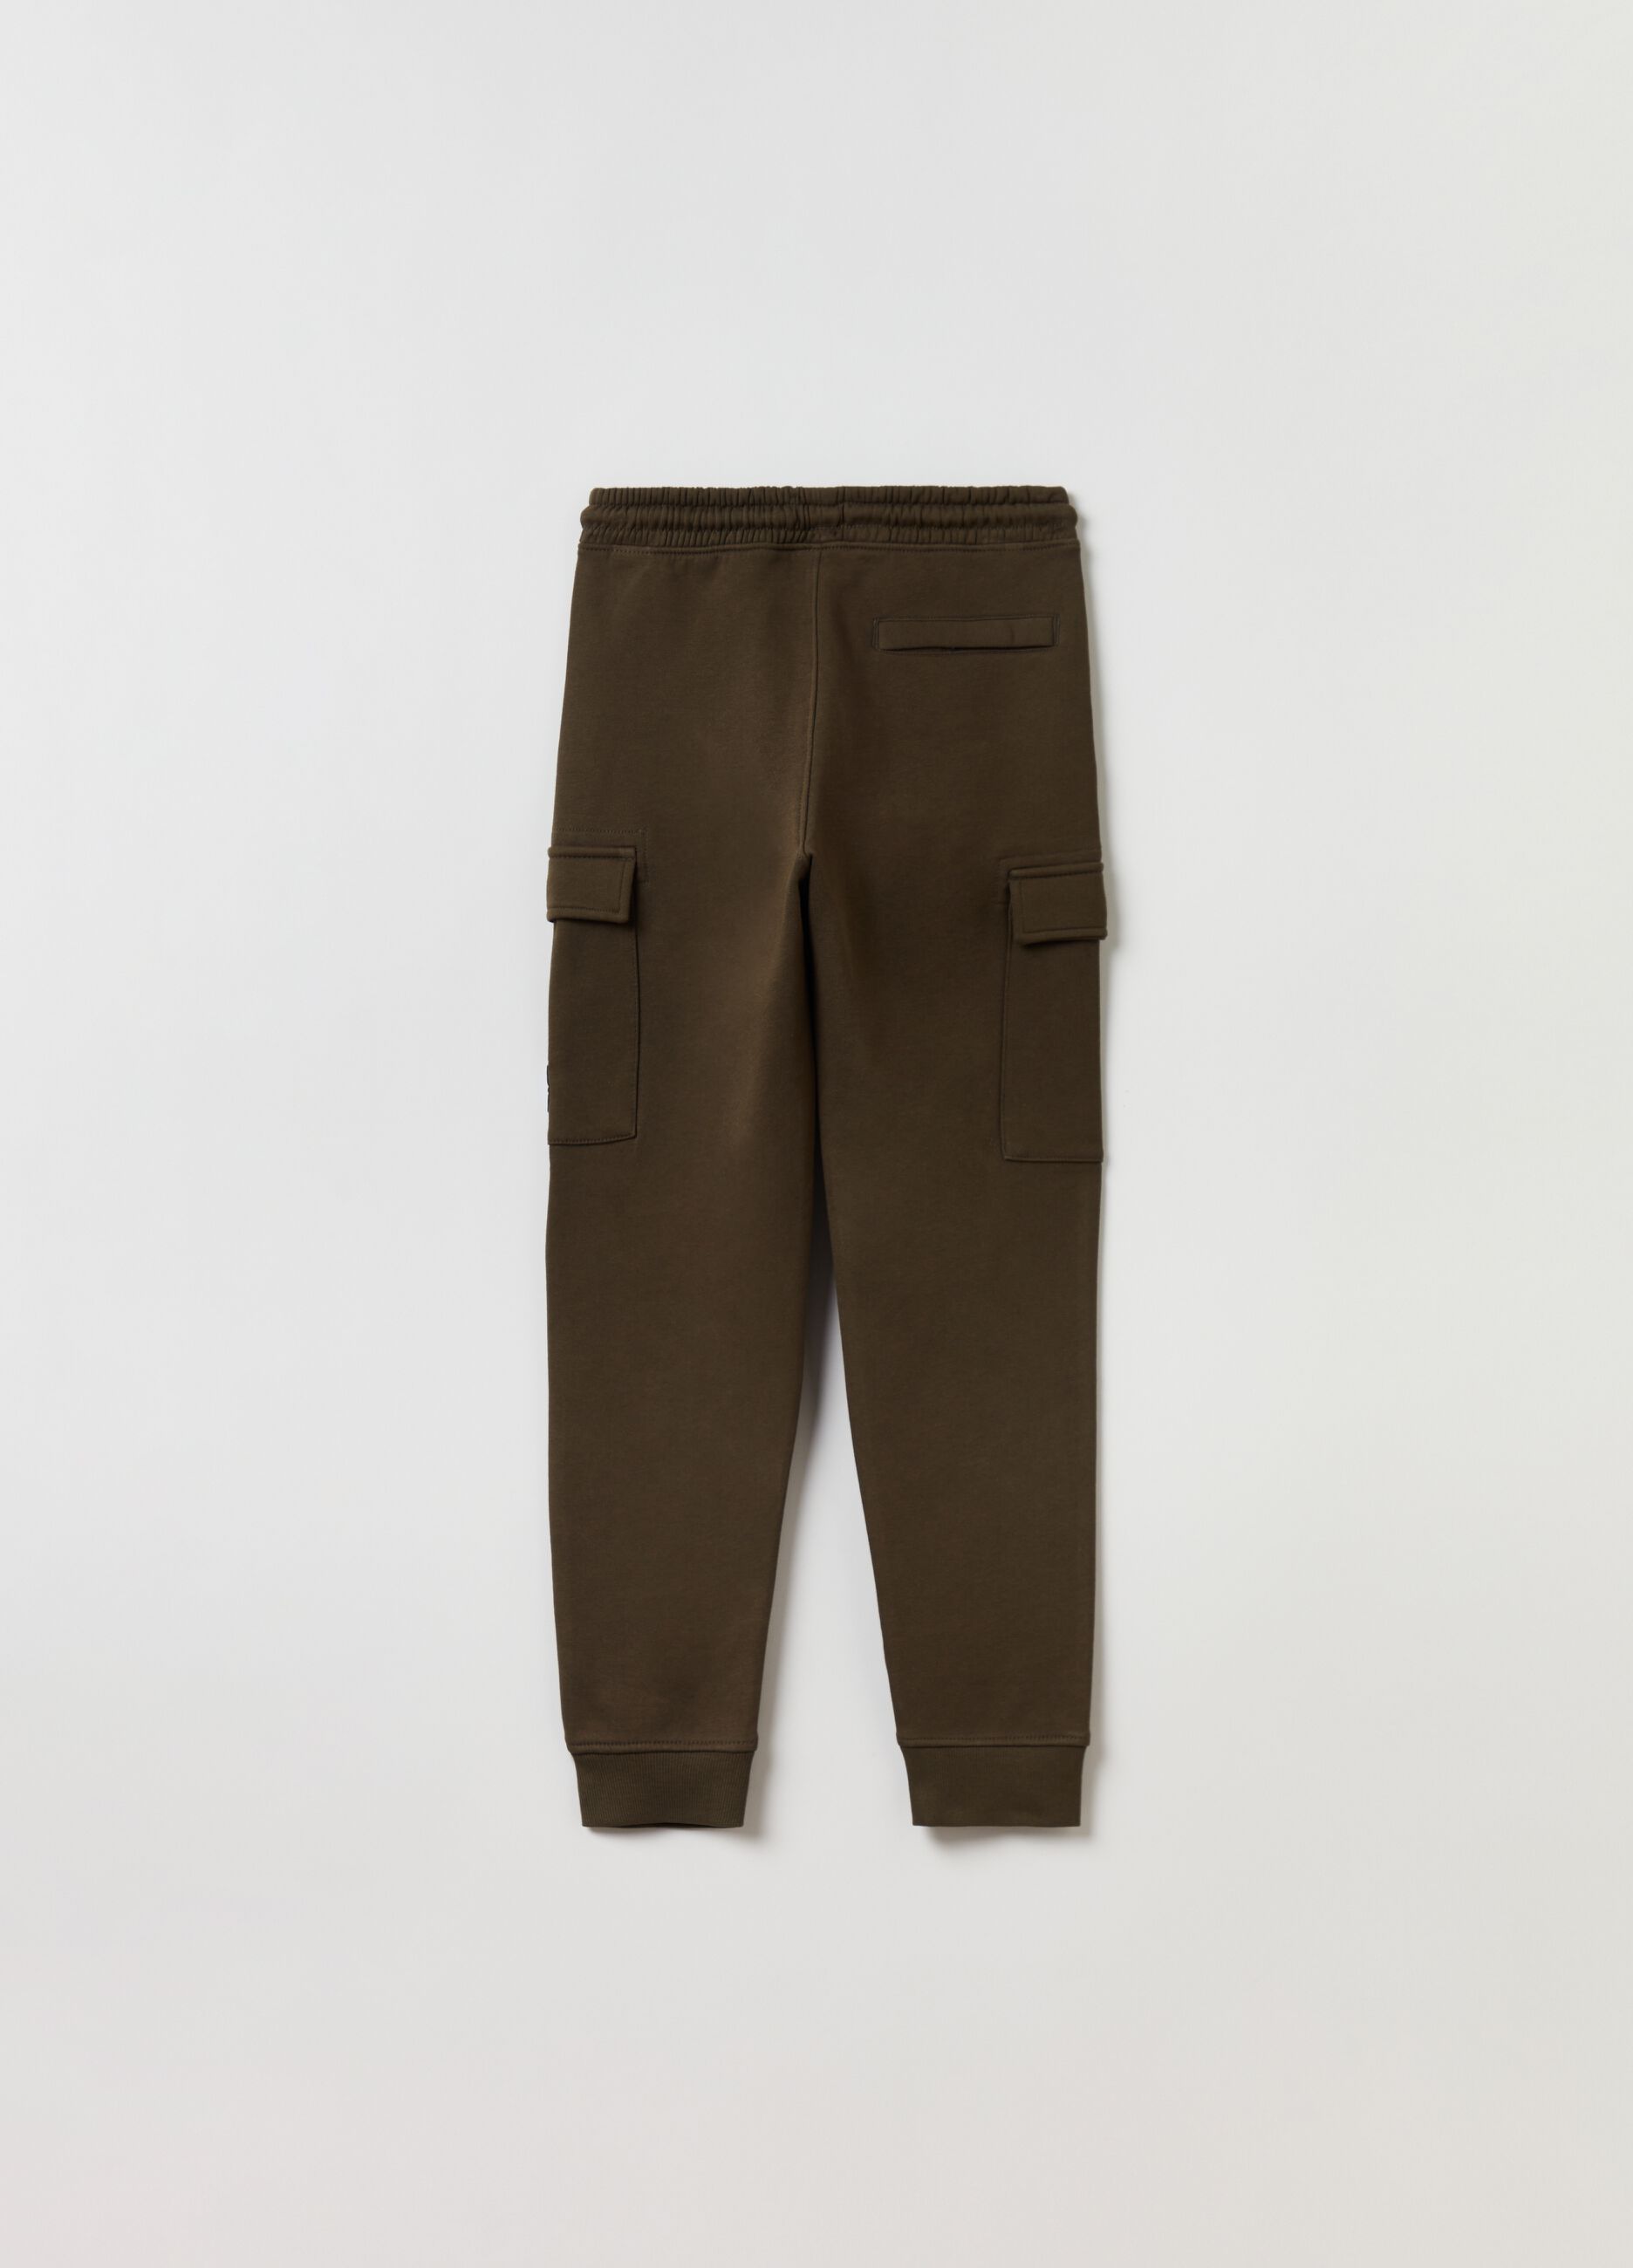 Tokyo Youth Riot Again cargo joggers_2